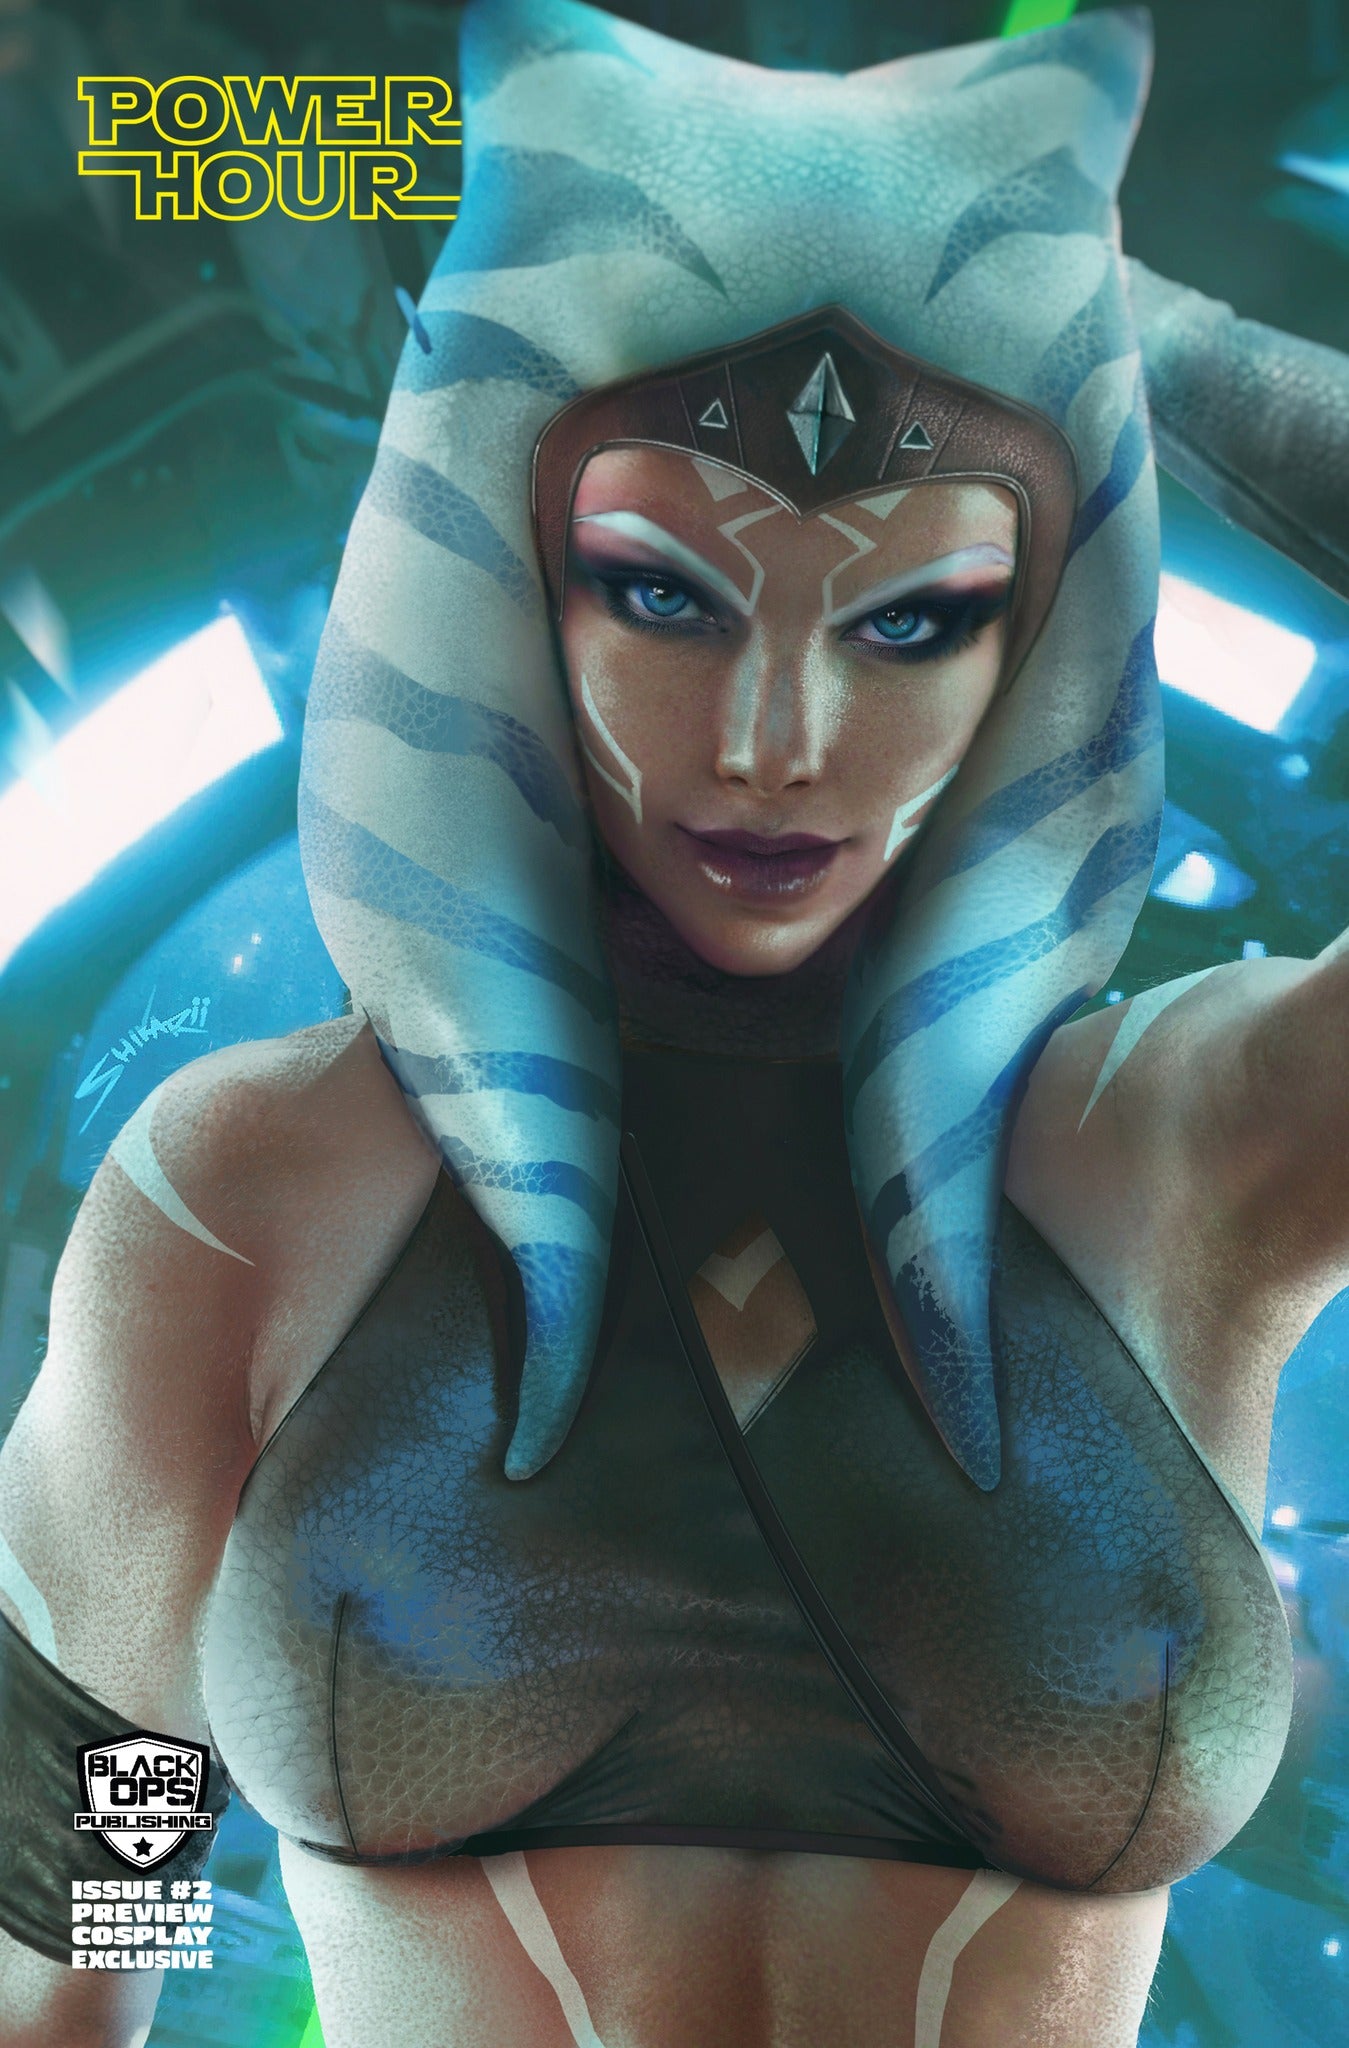 POWER HOUR #2 NOT A JEDI SHIKARII MAY THE 4TH PREVIEW VARIANTS